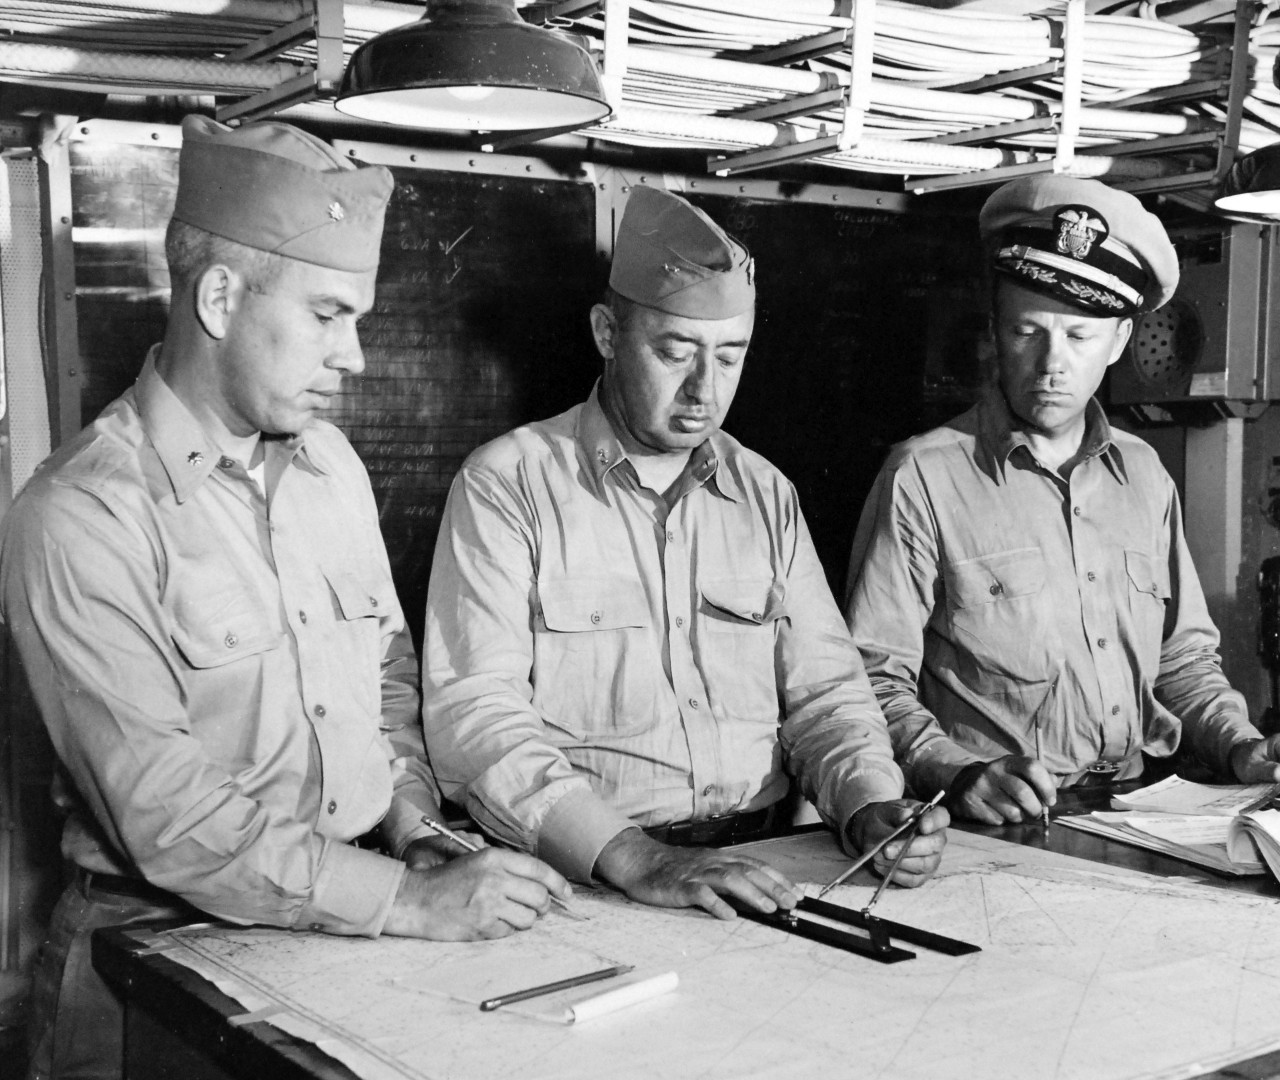 80-G-419159:  Rear Admiral Joseph J. Clark onboard USS Kearsarge (CV-33), July 1949.   Left to right: Lieutenant R.E. Merchant; Rear Admiral J. J. Clark; and Captain P. Henry discussing operations during reserve training cruise held onboard, July 6, 1943.     Official U.S. Navy Photograph, now in the collections of the National Archives.   